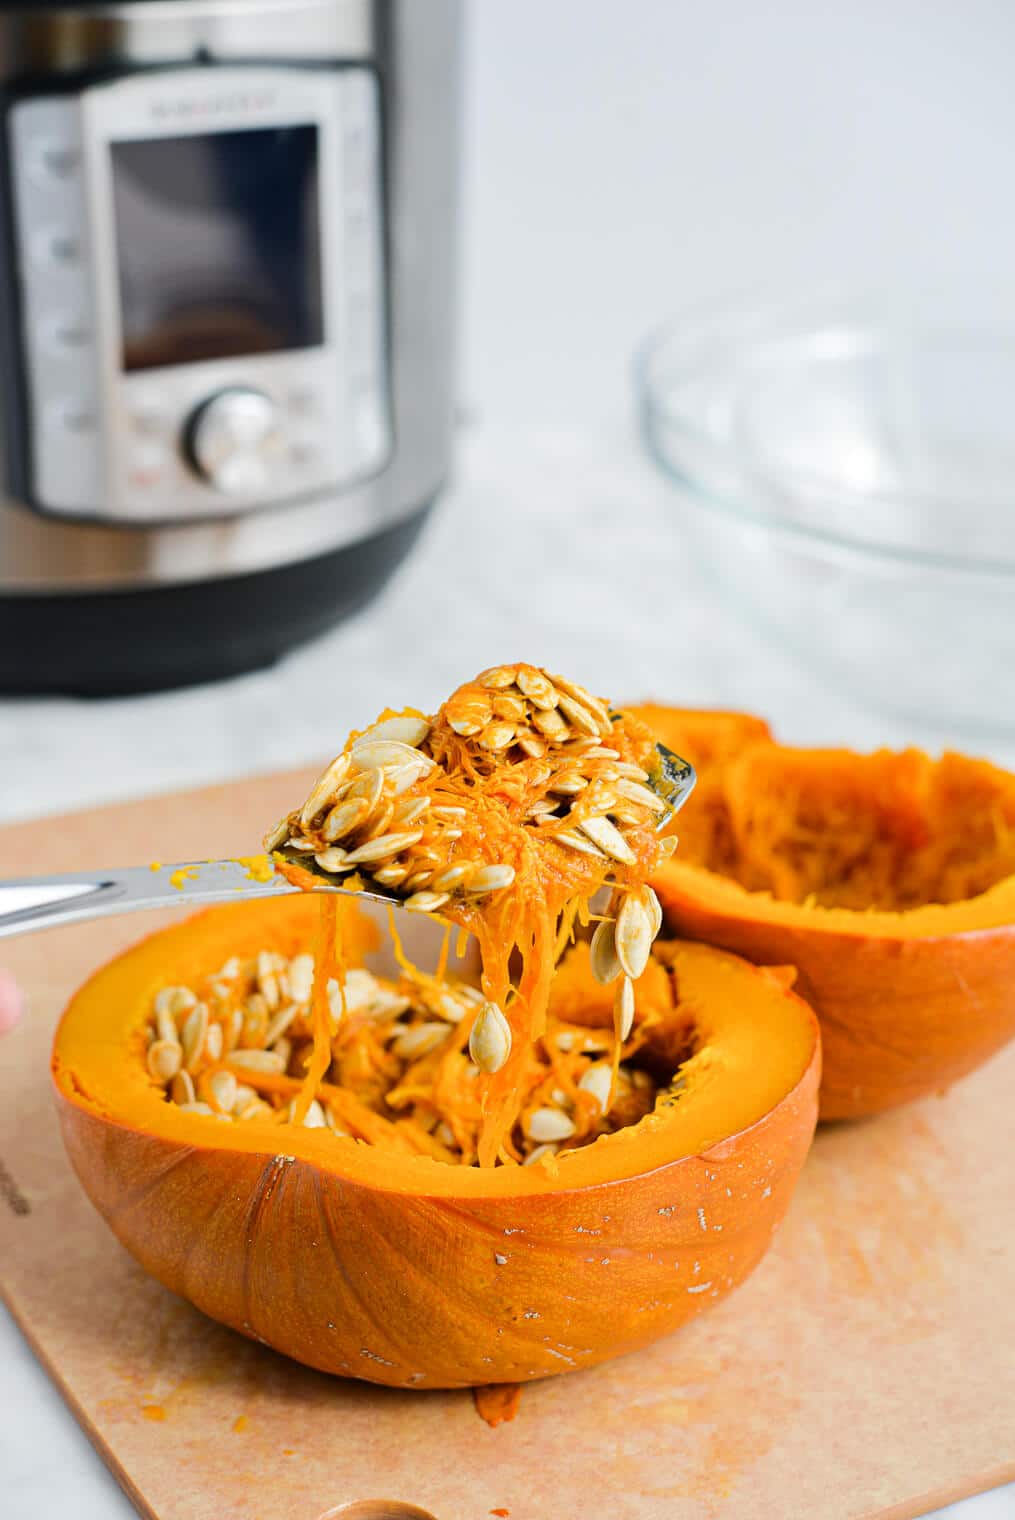 a side view of two halves of a cooked pumpkin with a blunt-nose spoon scooping out the pumpkin seeds